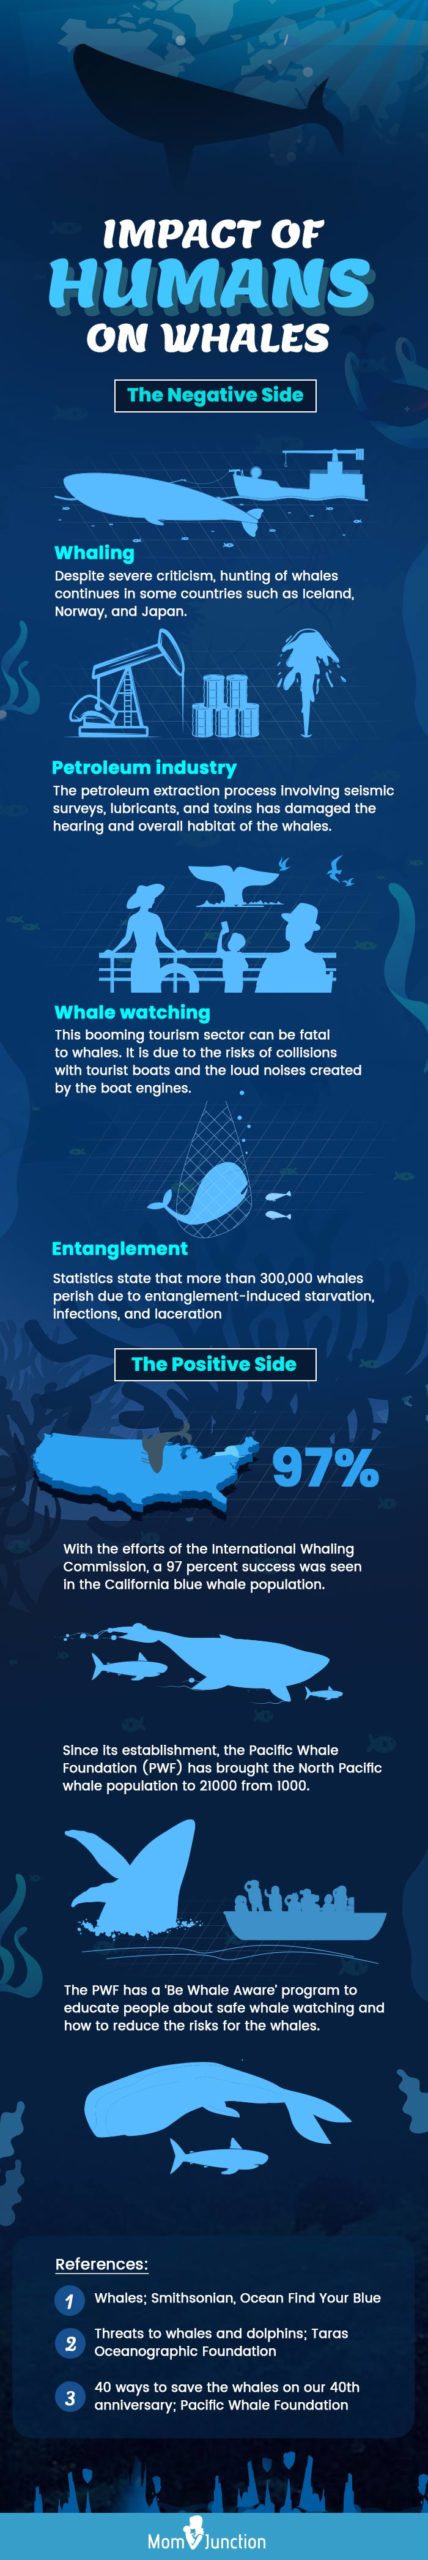 impact of humans on whales [infographic]